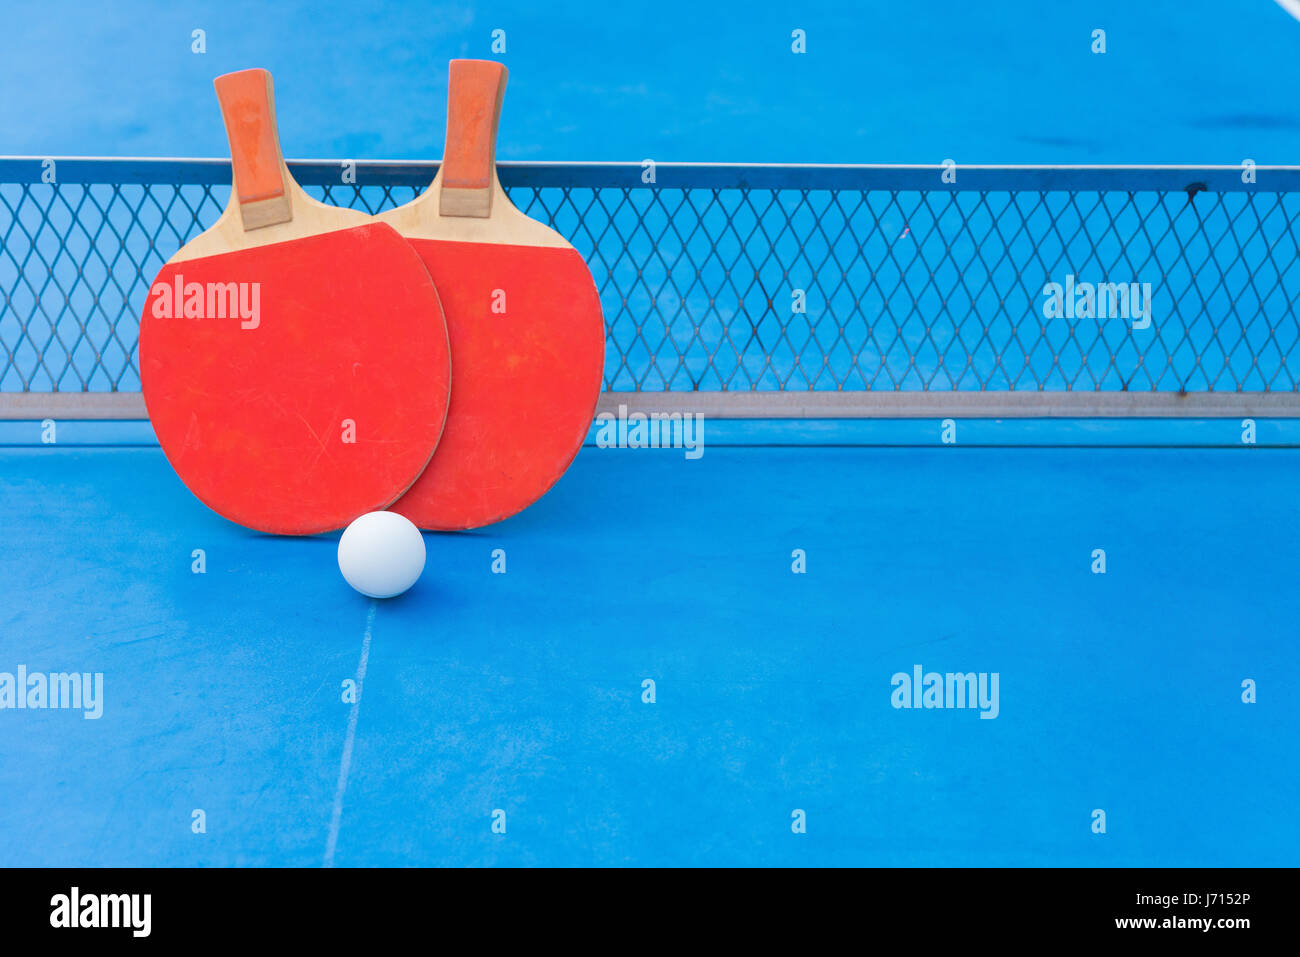 two pingpong rackets and ball and net on a blue pingpong table with copy space Stock Photo